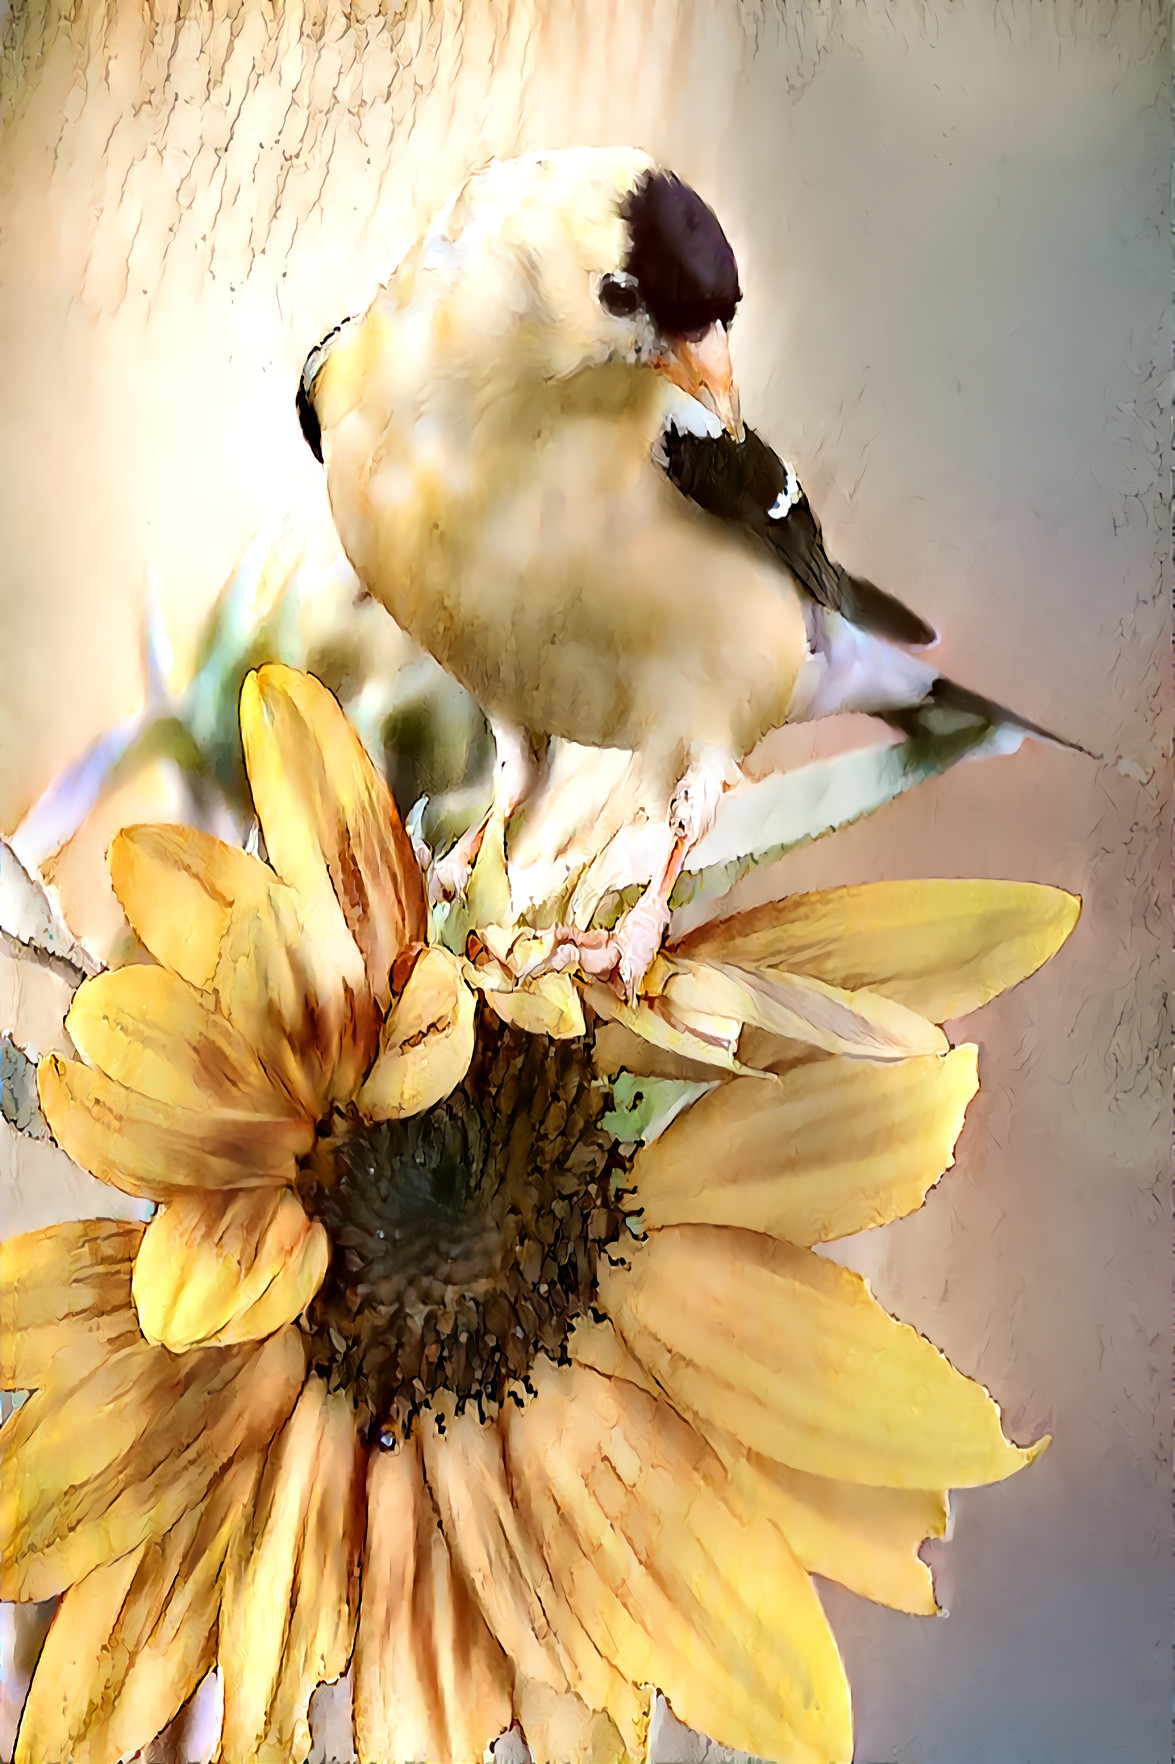 Goldfinch and Sunflower